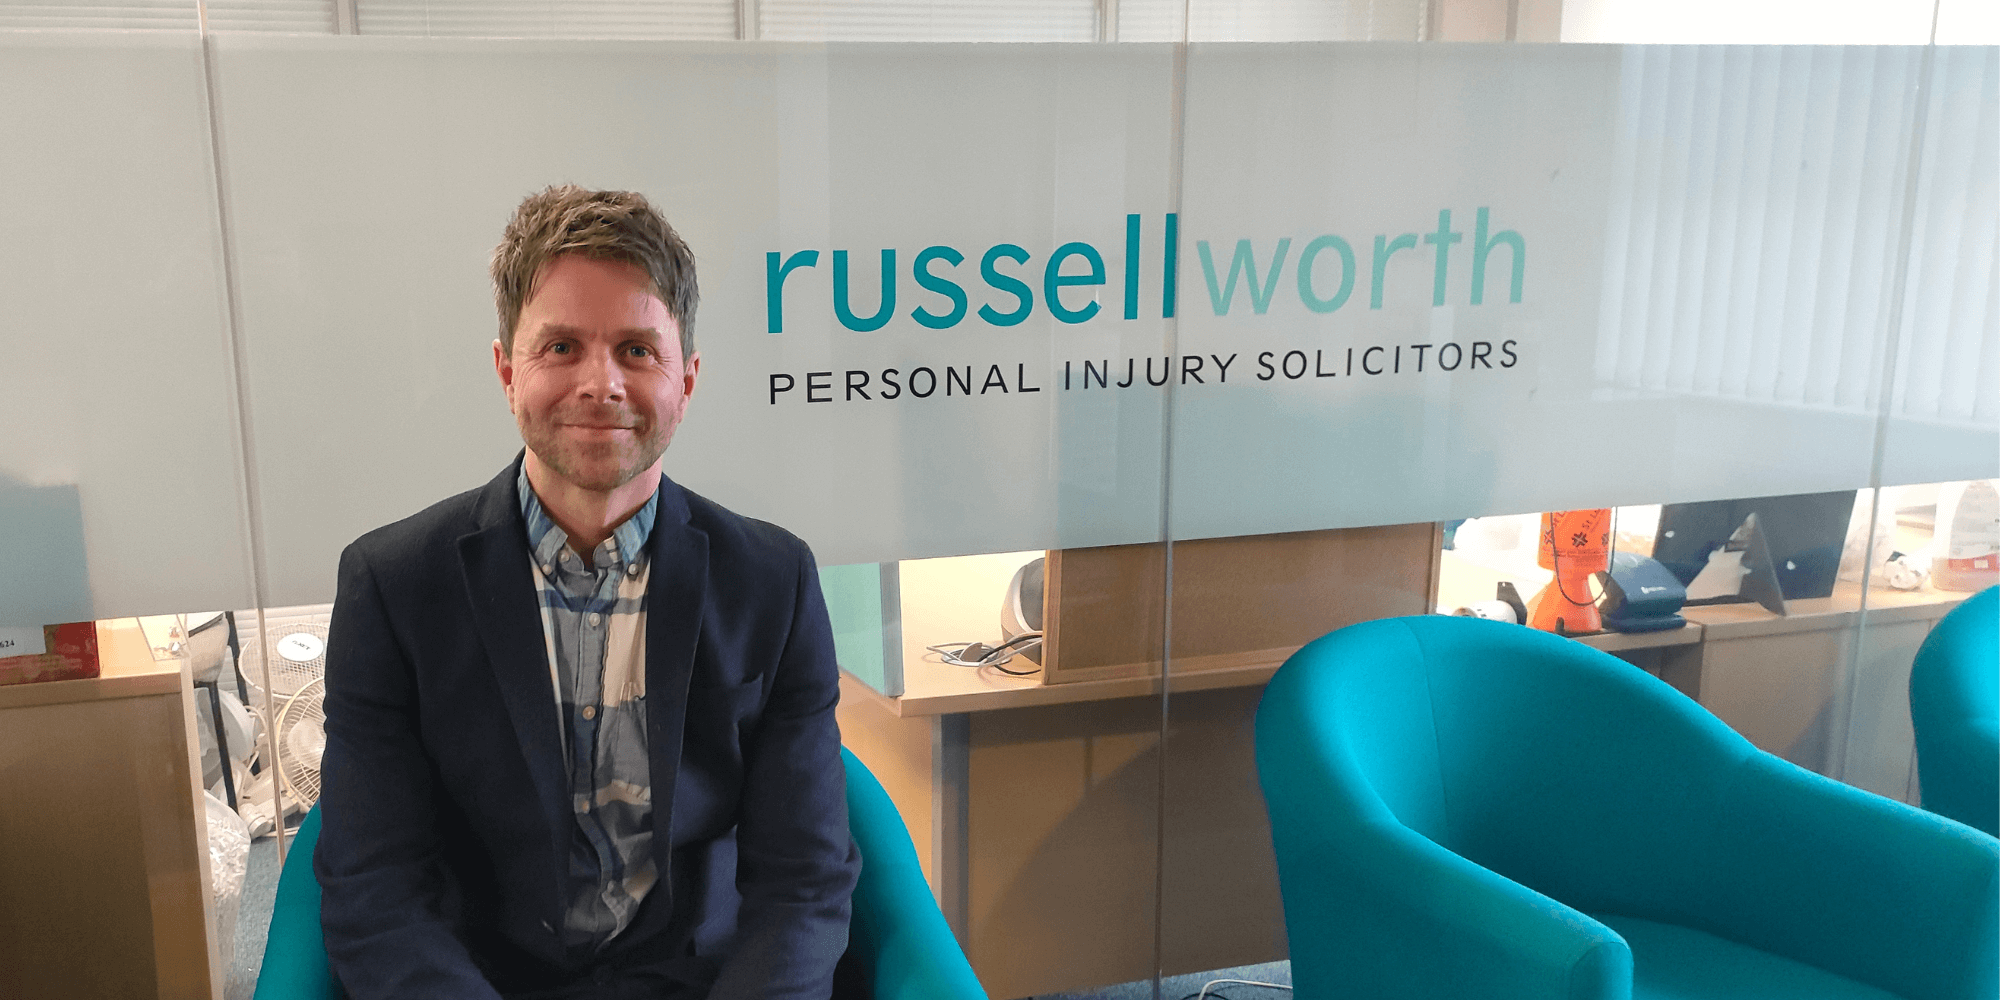 Russell Worth Solicitors had a traditional IT network with an on-premise server that had aged beyond its recommended lifespan. This meant that they were using an outdated email server and that their network was no longer compatible with their disaster recovery solution.